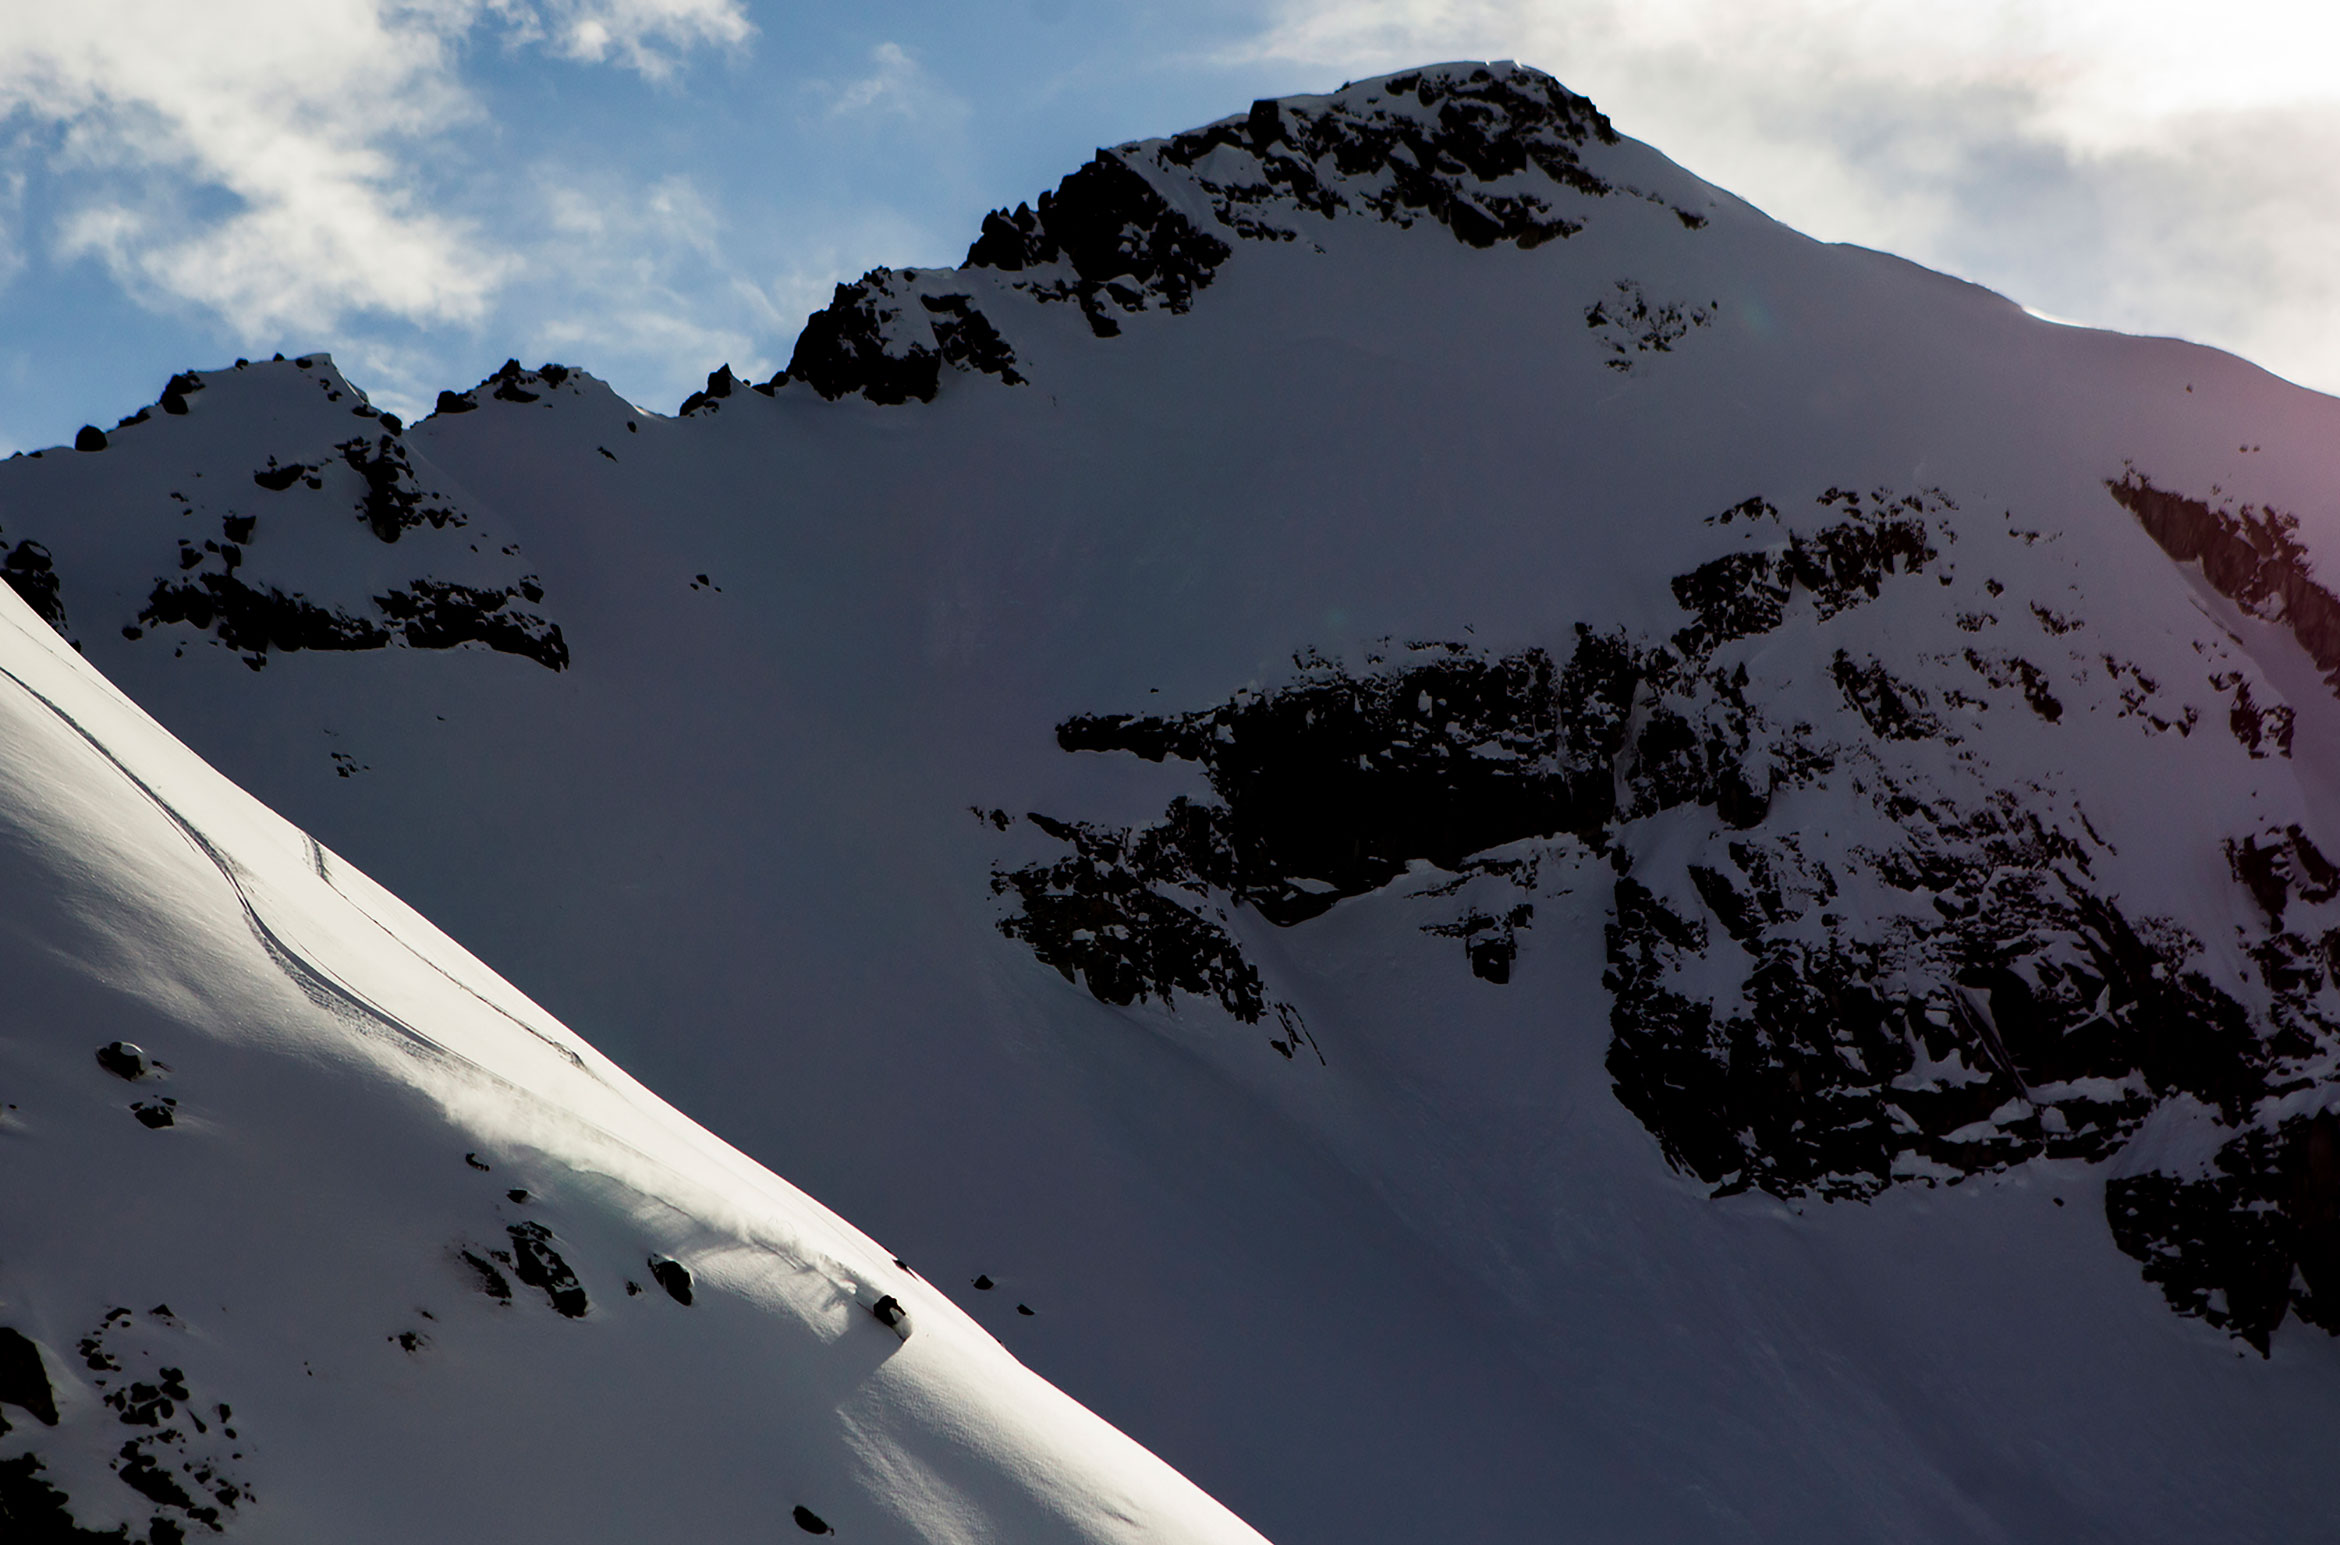 A skier curves down the mountain in the Whistler backcountry.